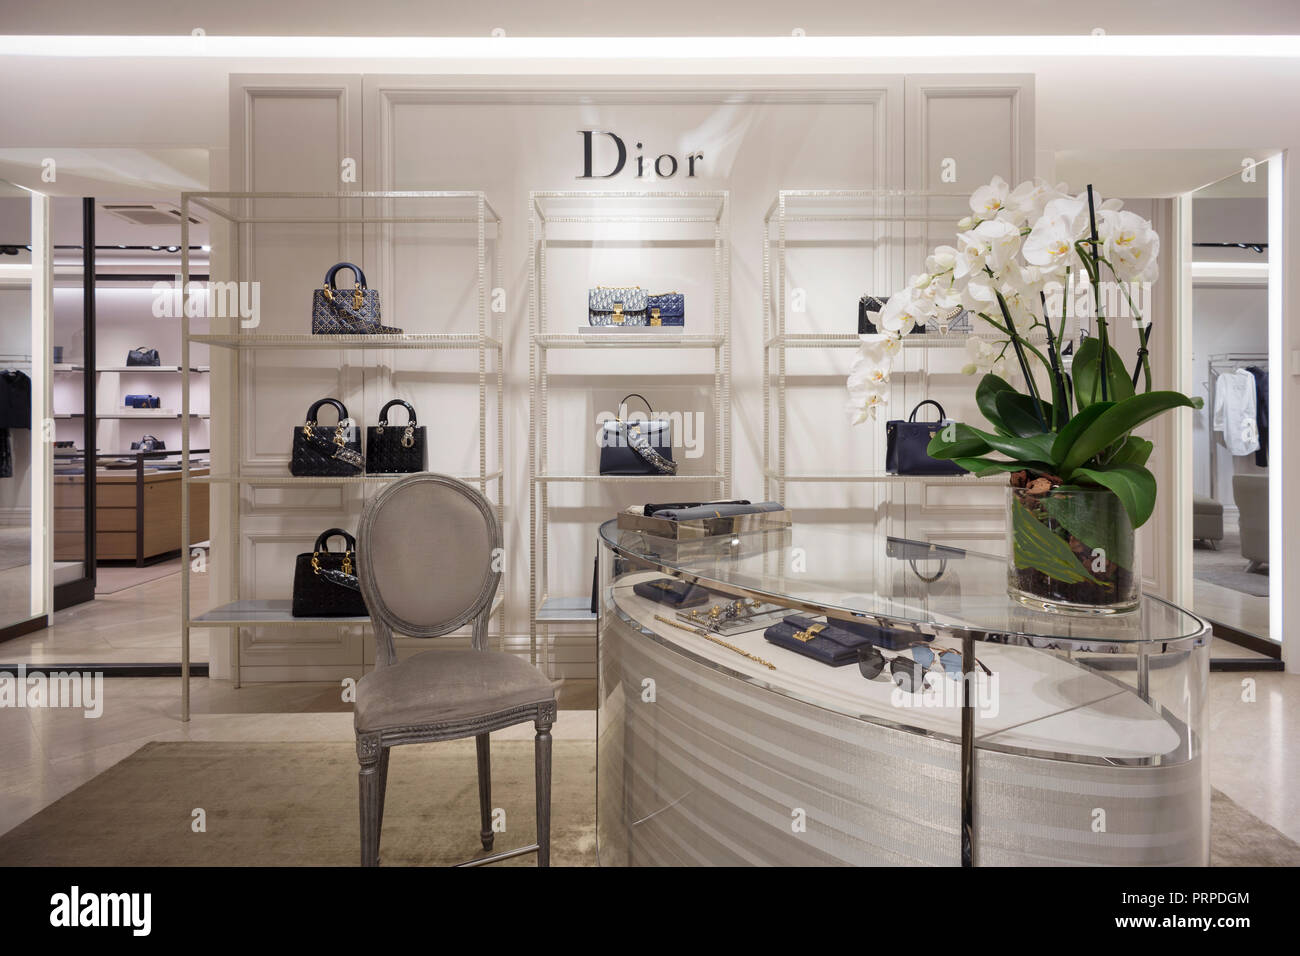 Christian Dior store in a luxury fashion mall Stock Photo